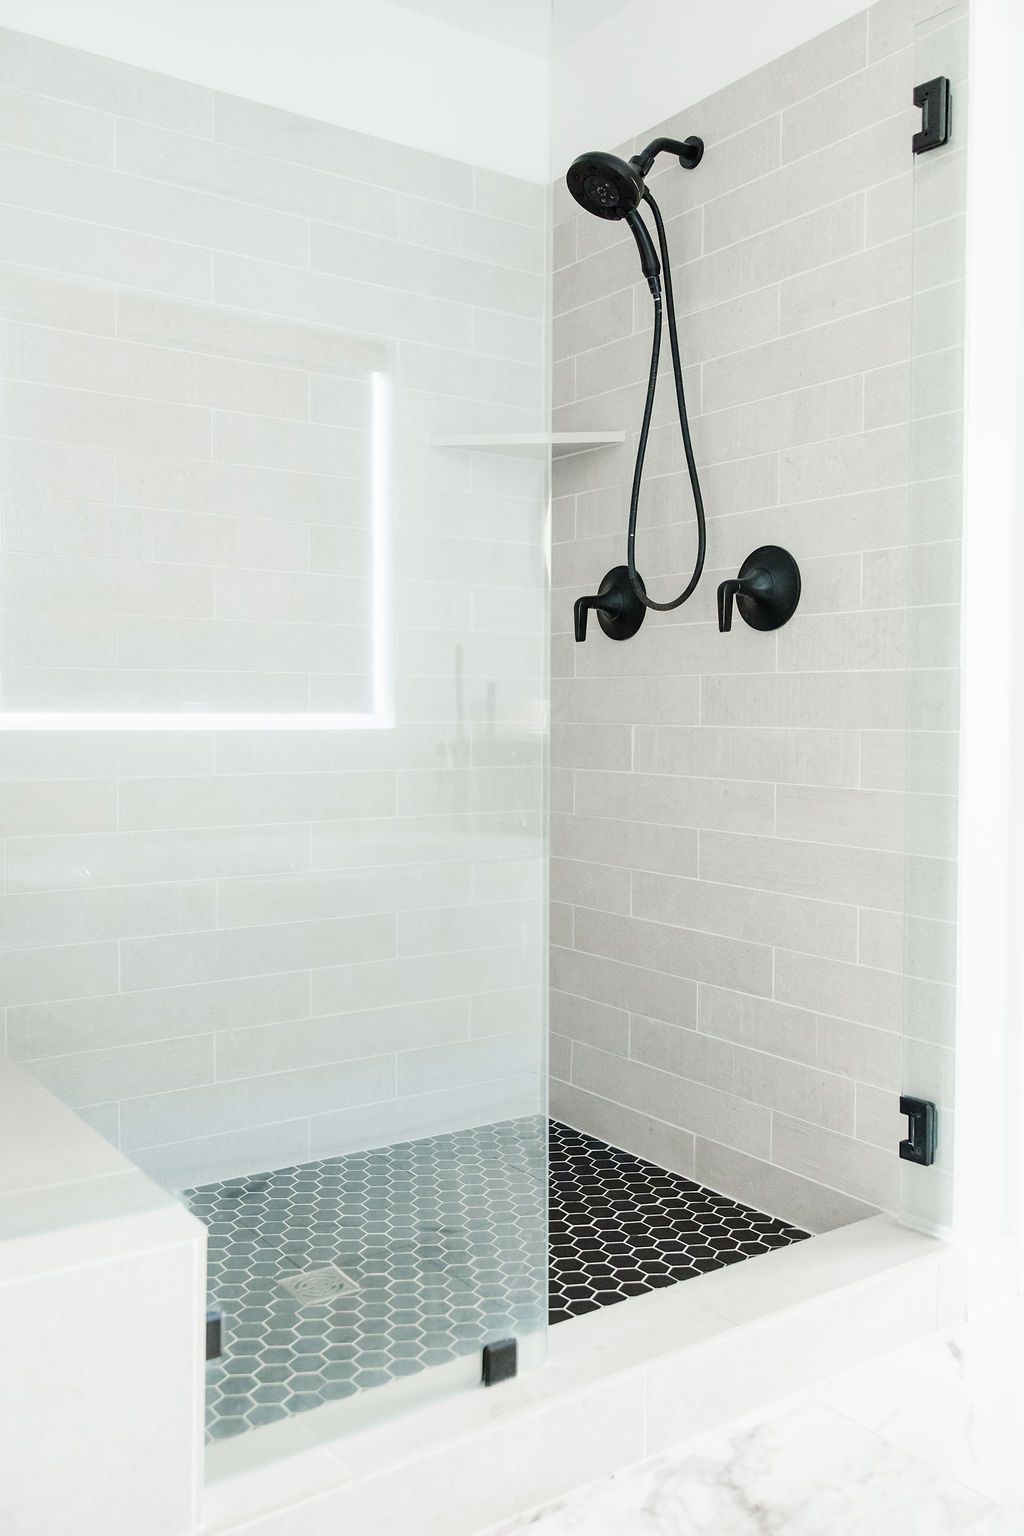 how to stain grout lines in a bathroom shower with lots of different tiles and white grout lines